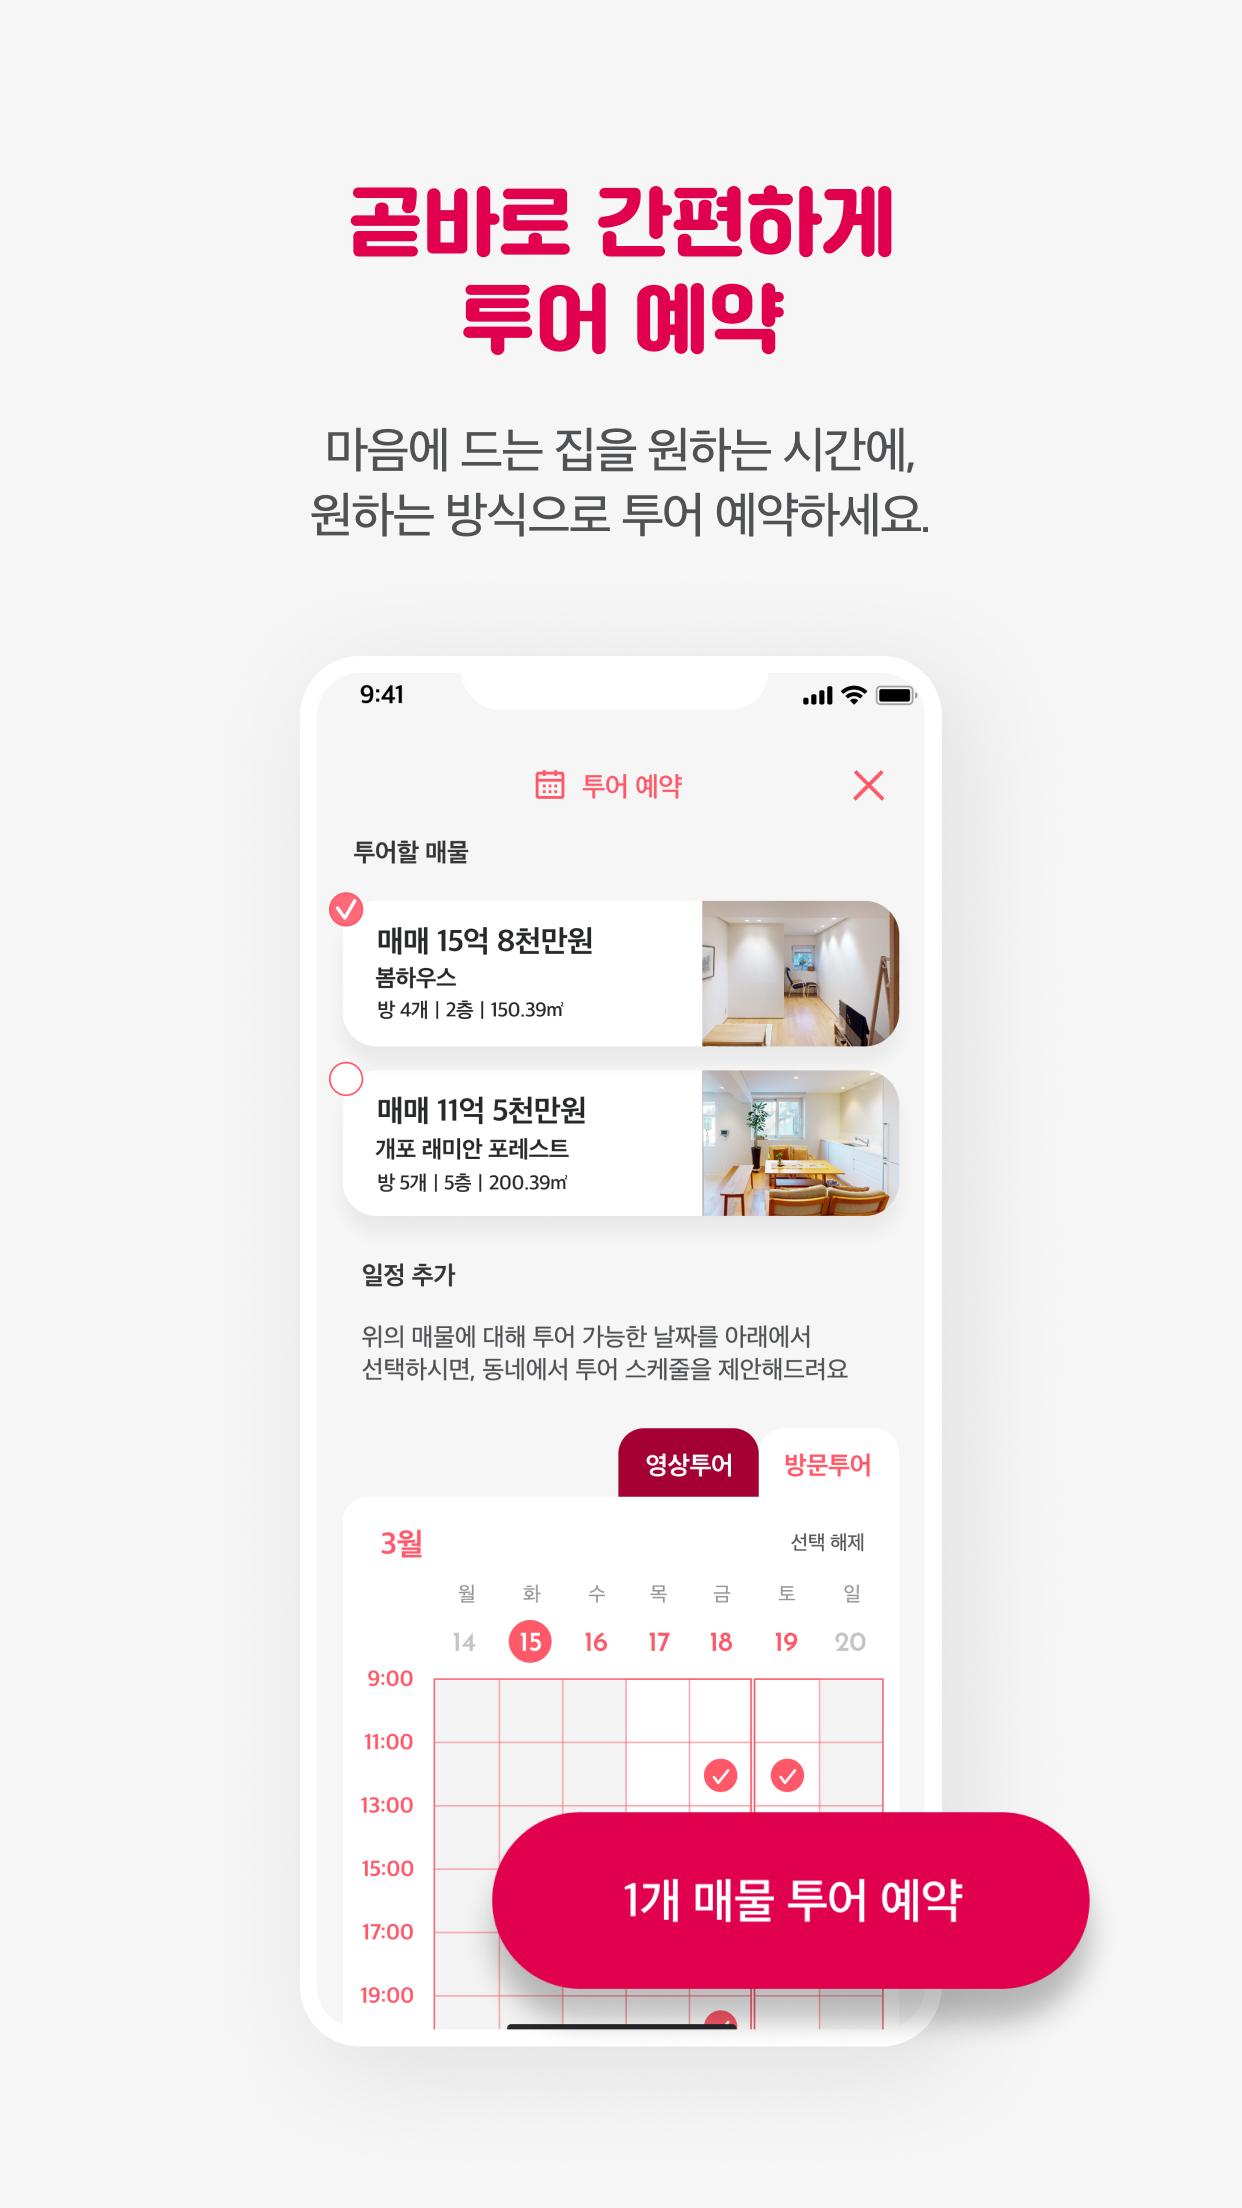 Dongnae Real Estate: Find Your Home 1.0.2 Screenshot 14